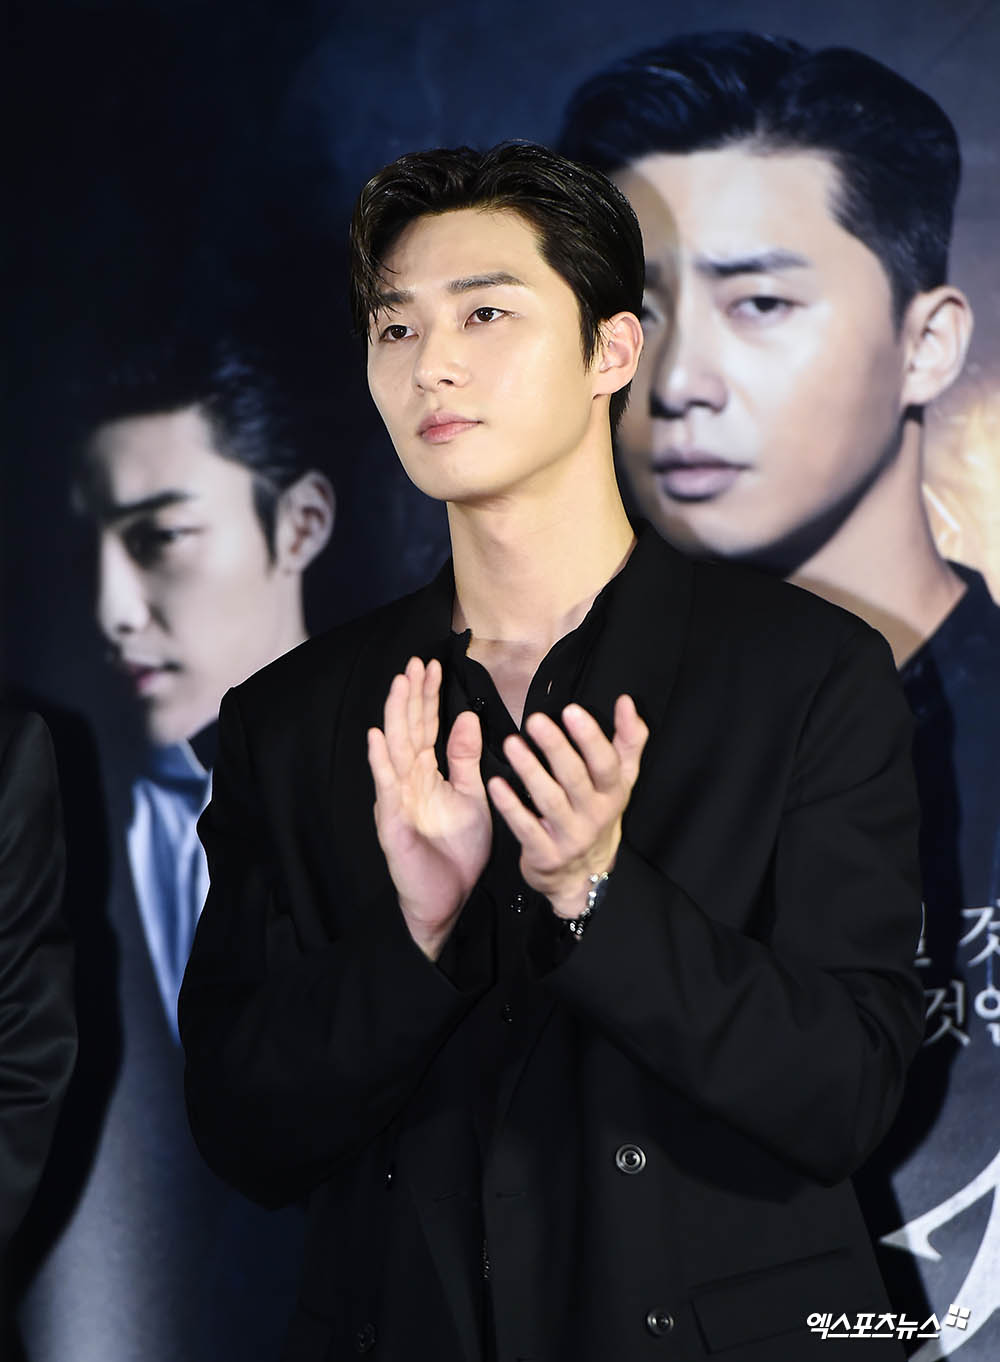 Actor Park Seo-joon, who attended the VIP premiere of the movie Lion at Lotte Cinema World Tower in Shincheon-dong, Seoul on the afternoon of the 30th, has photo time.